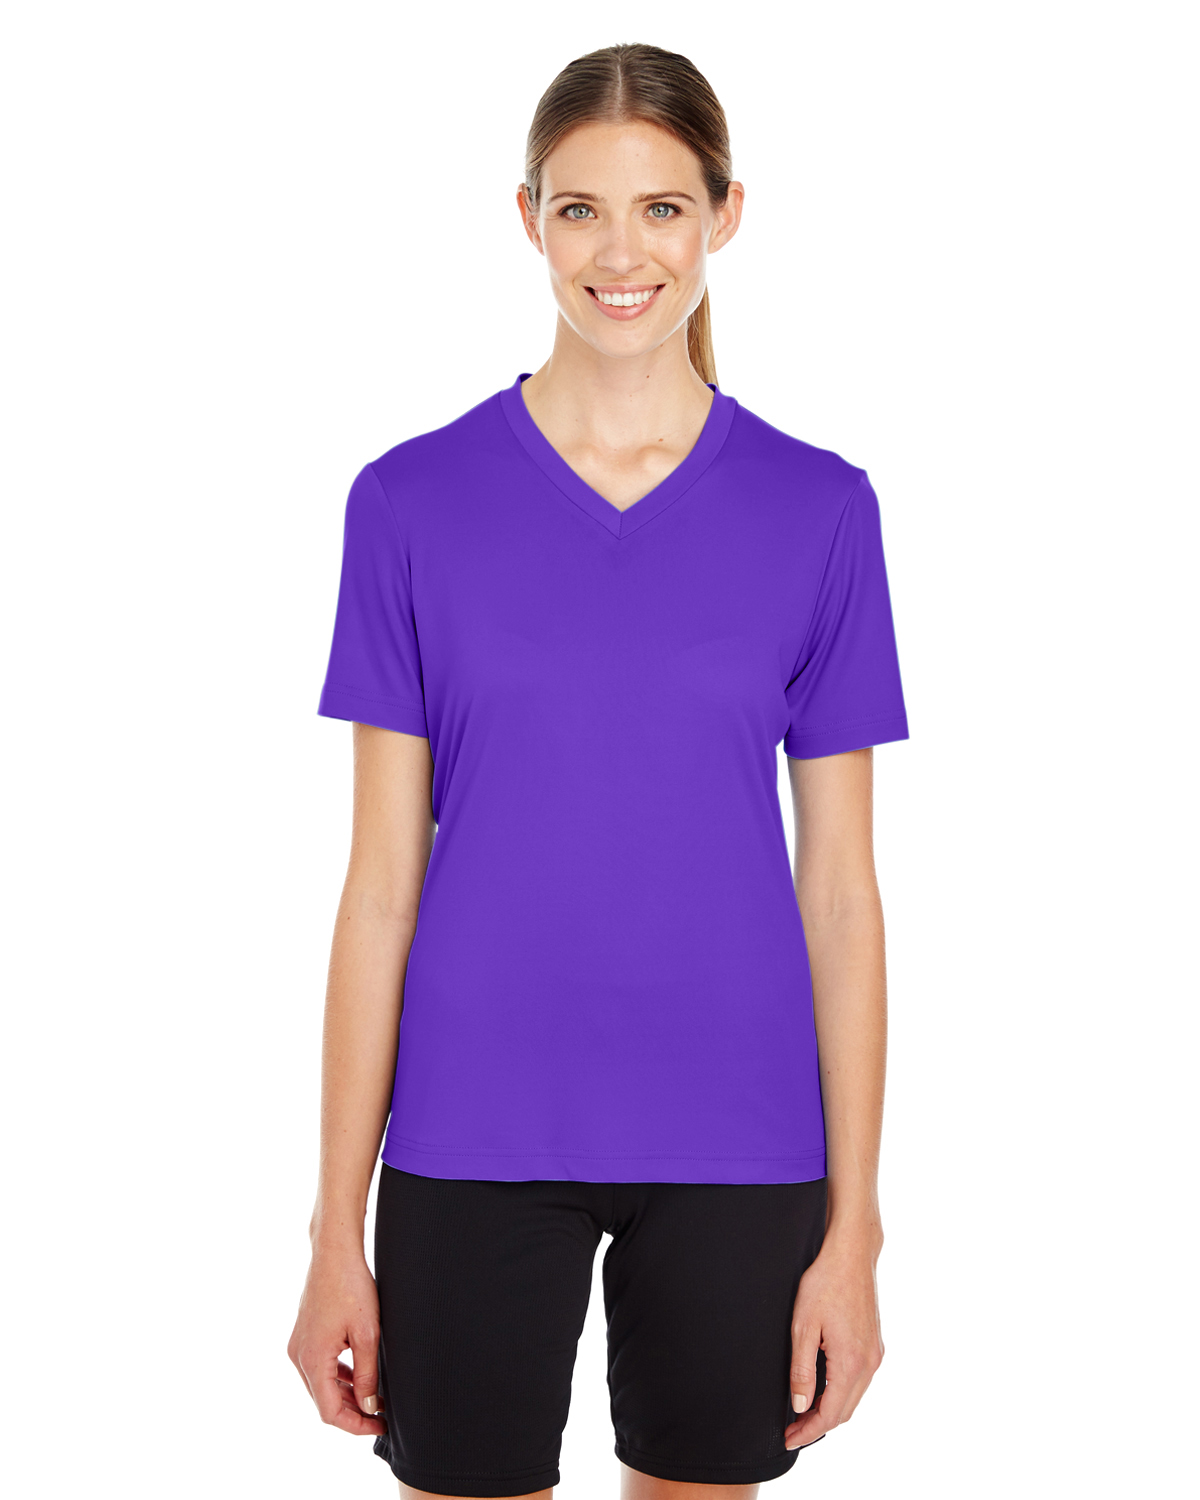 click to view Sport Purple